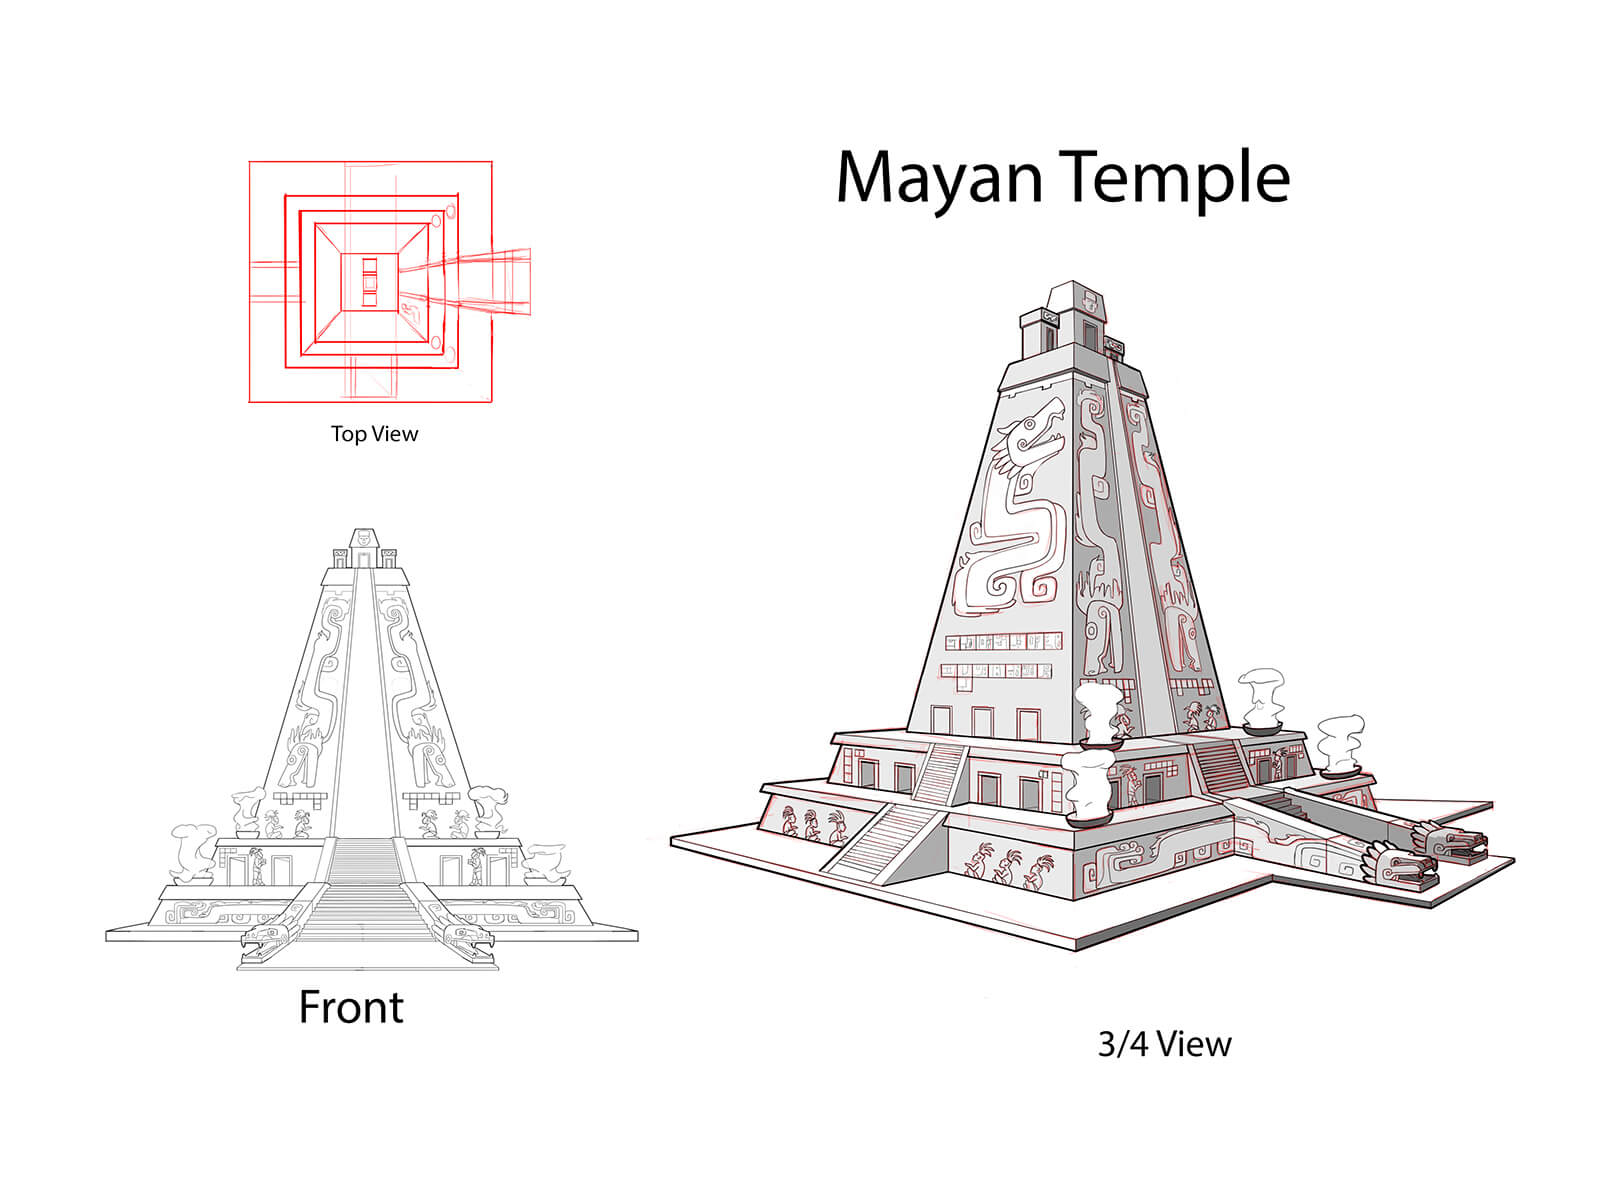 Multiple sketched views of a Mayan temple